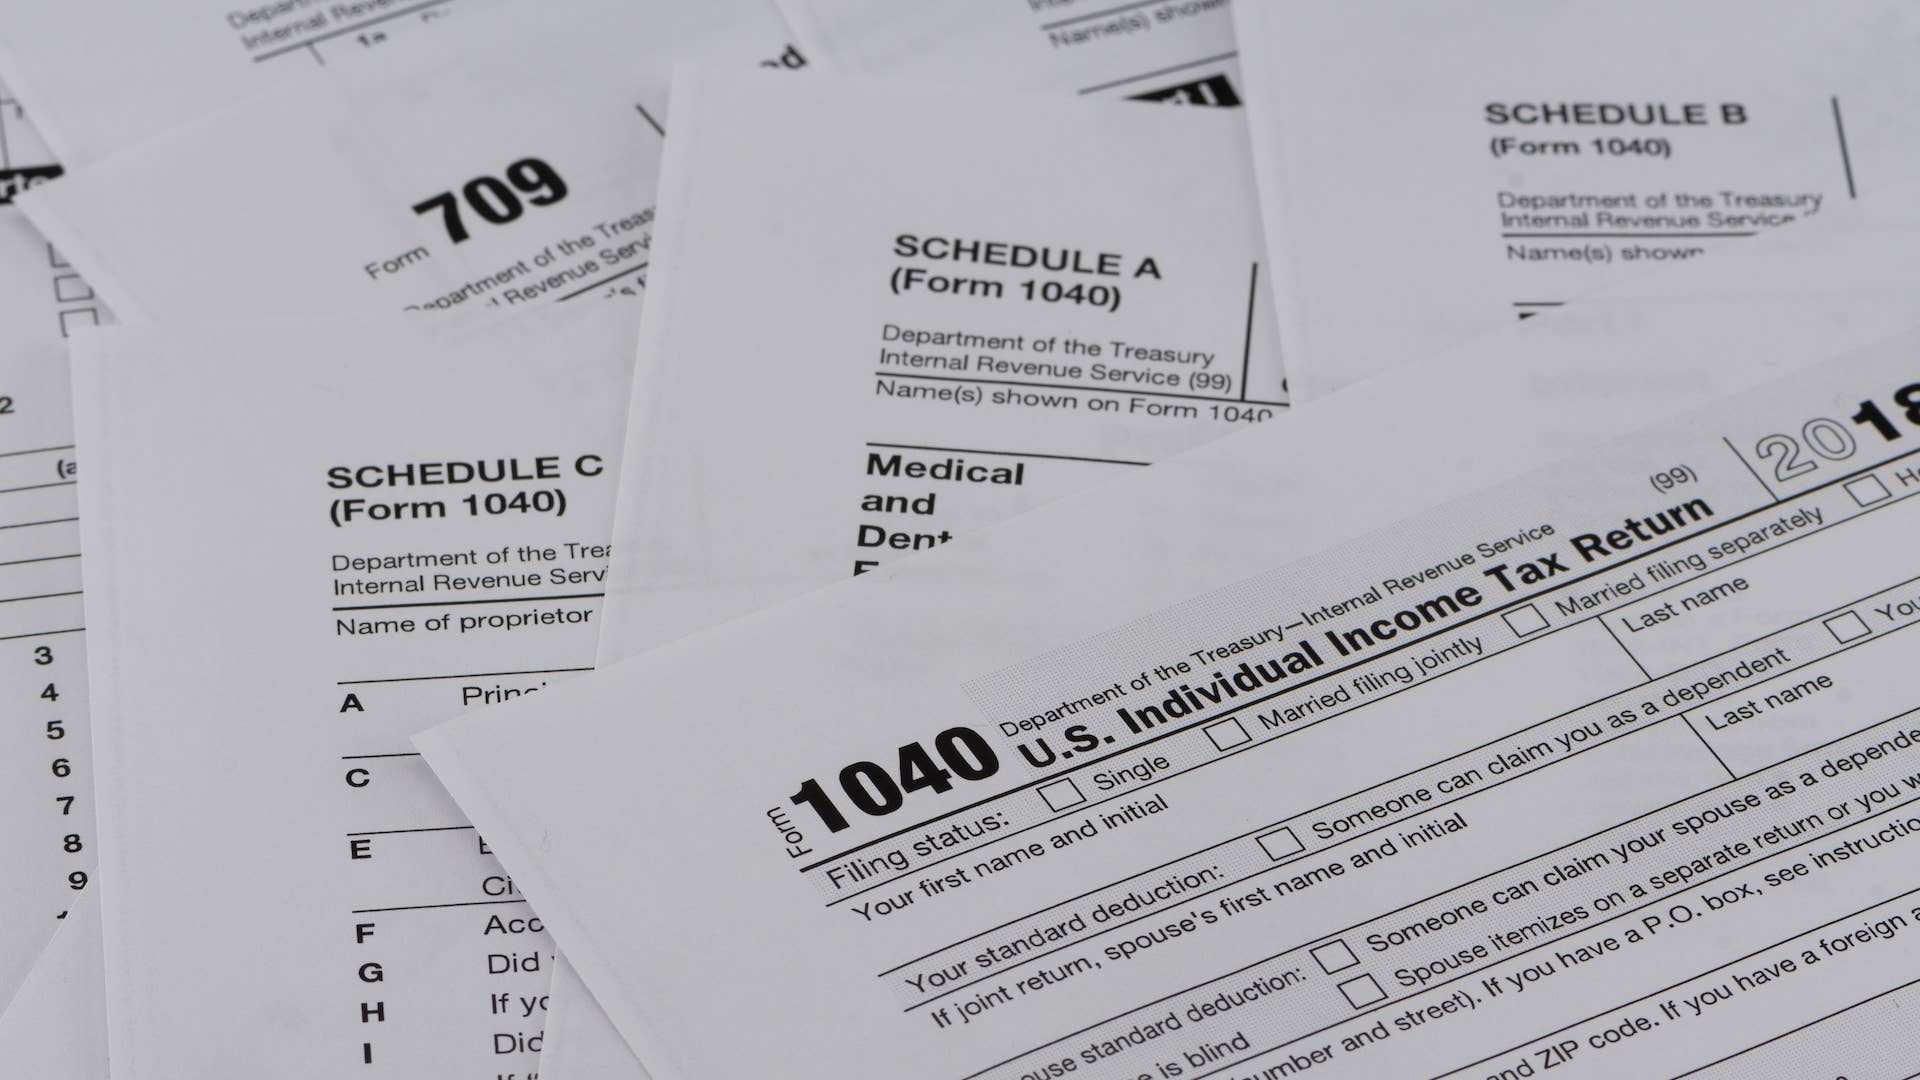 This is an image of IRS papers